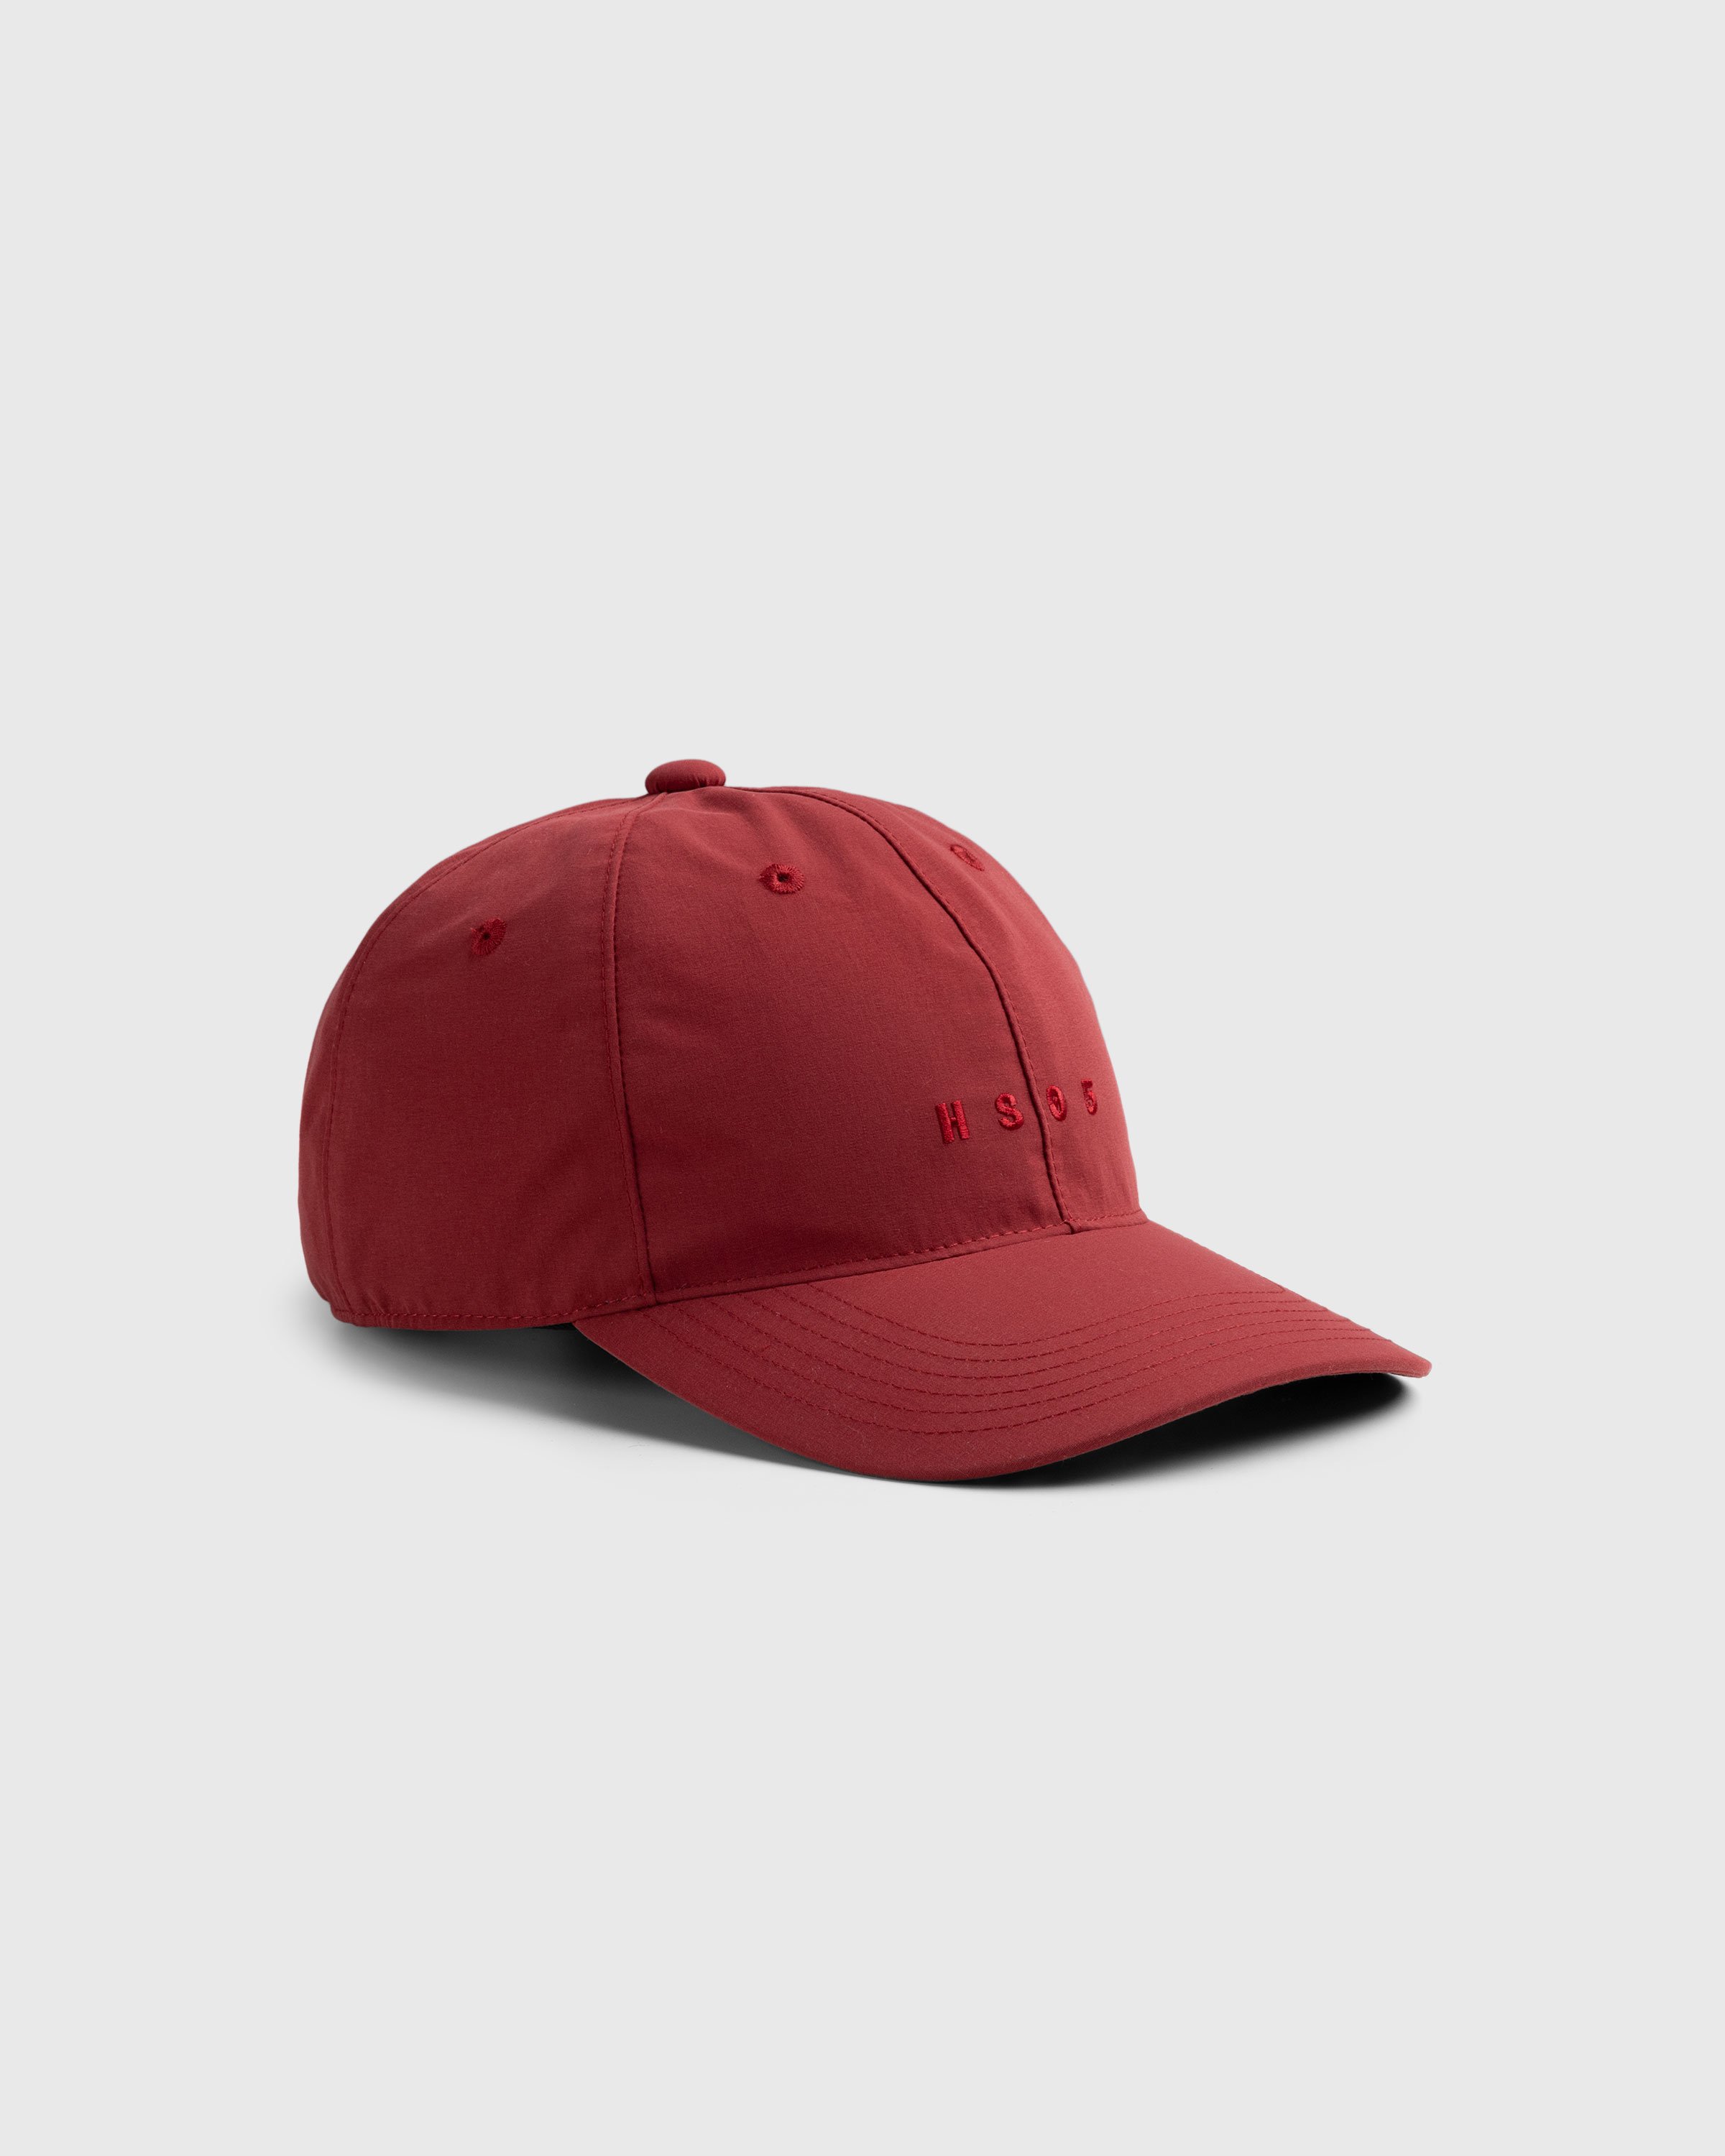 Highsnobiety HS05 - 3 Layer Taped Nylon Cap Red - Accessories - Red - Image 1